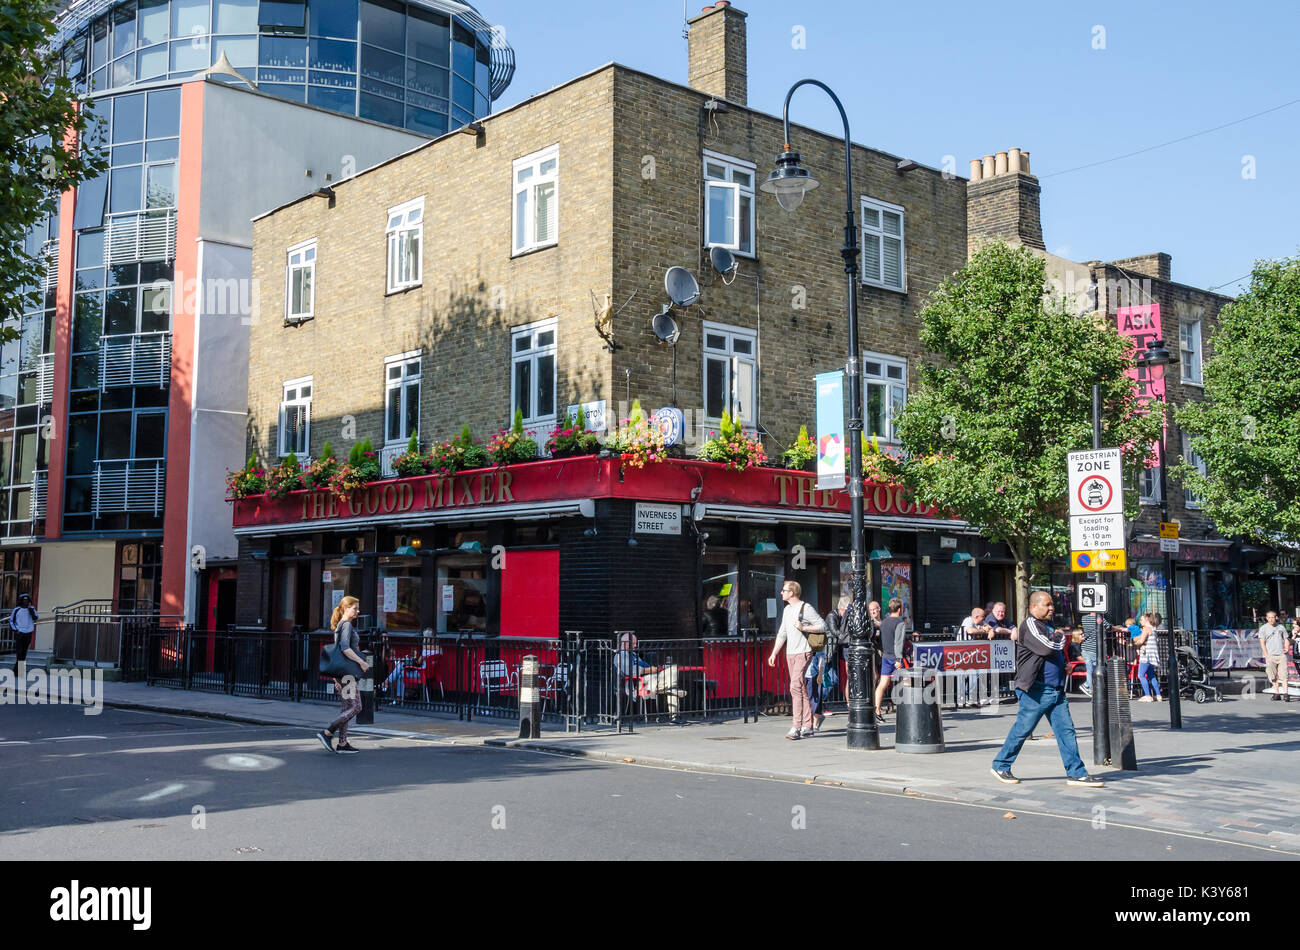 The Good Mixer pub on the corner of Inverness Street and Arlington Road in Camden, London. Stock Photo